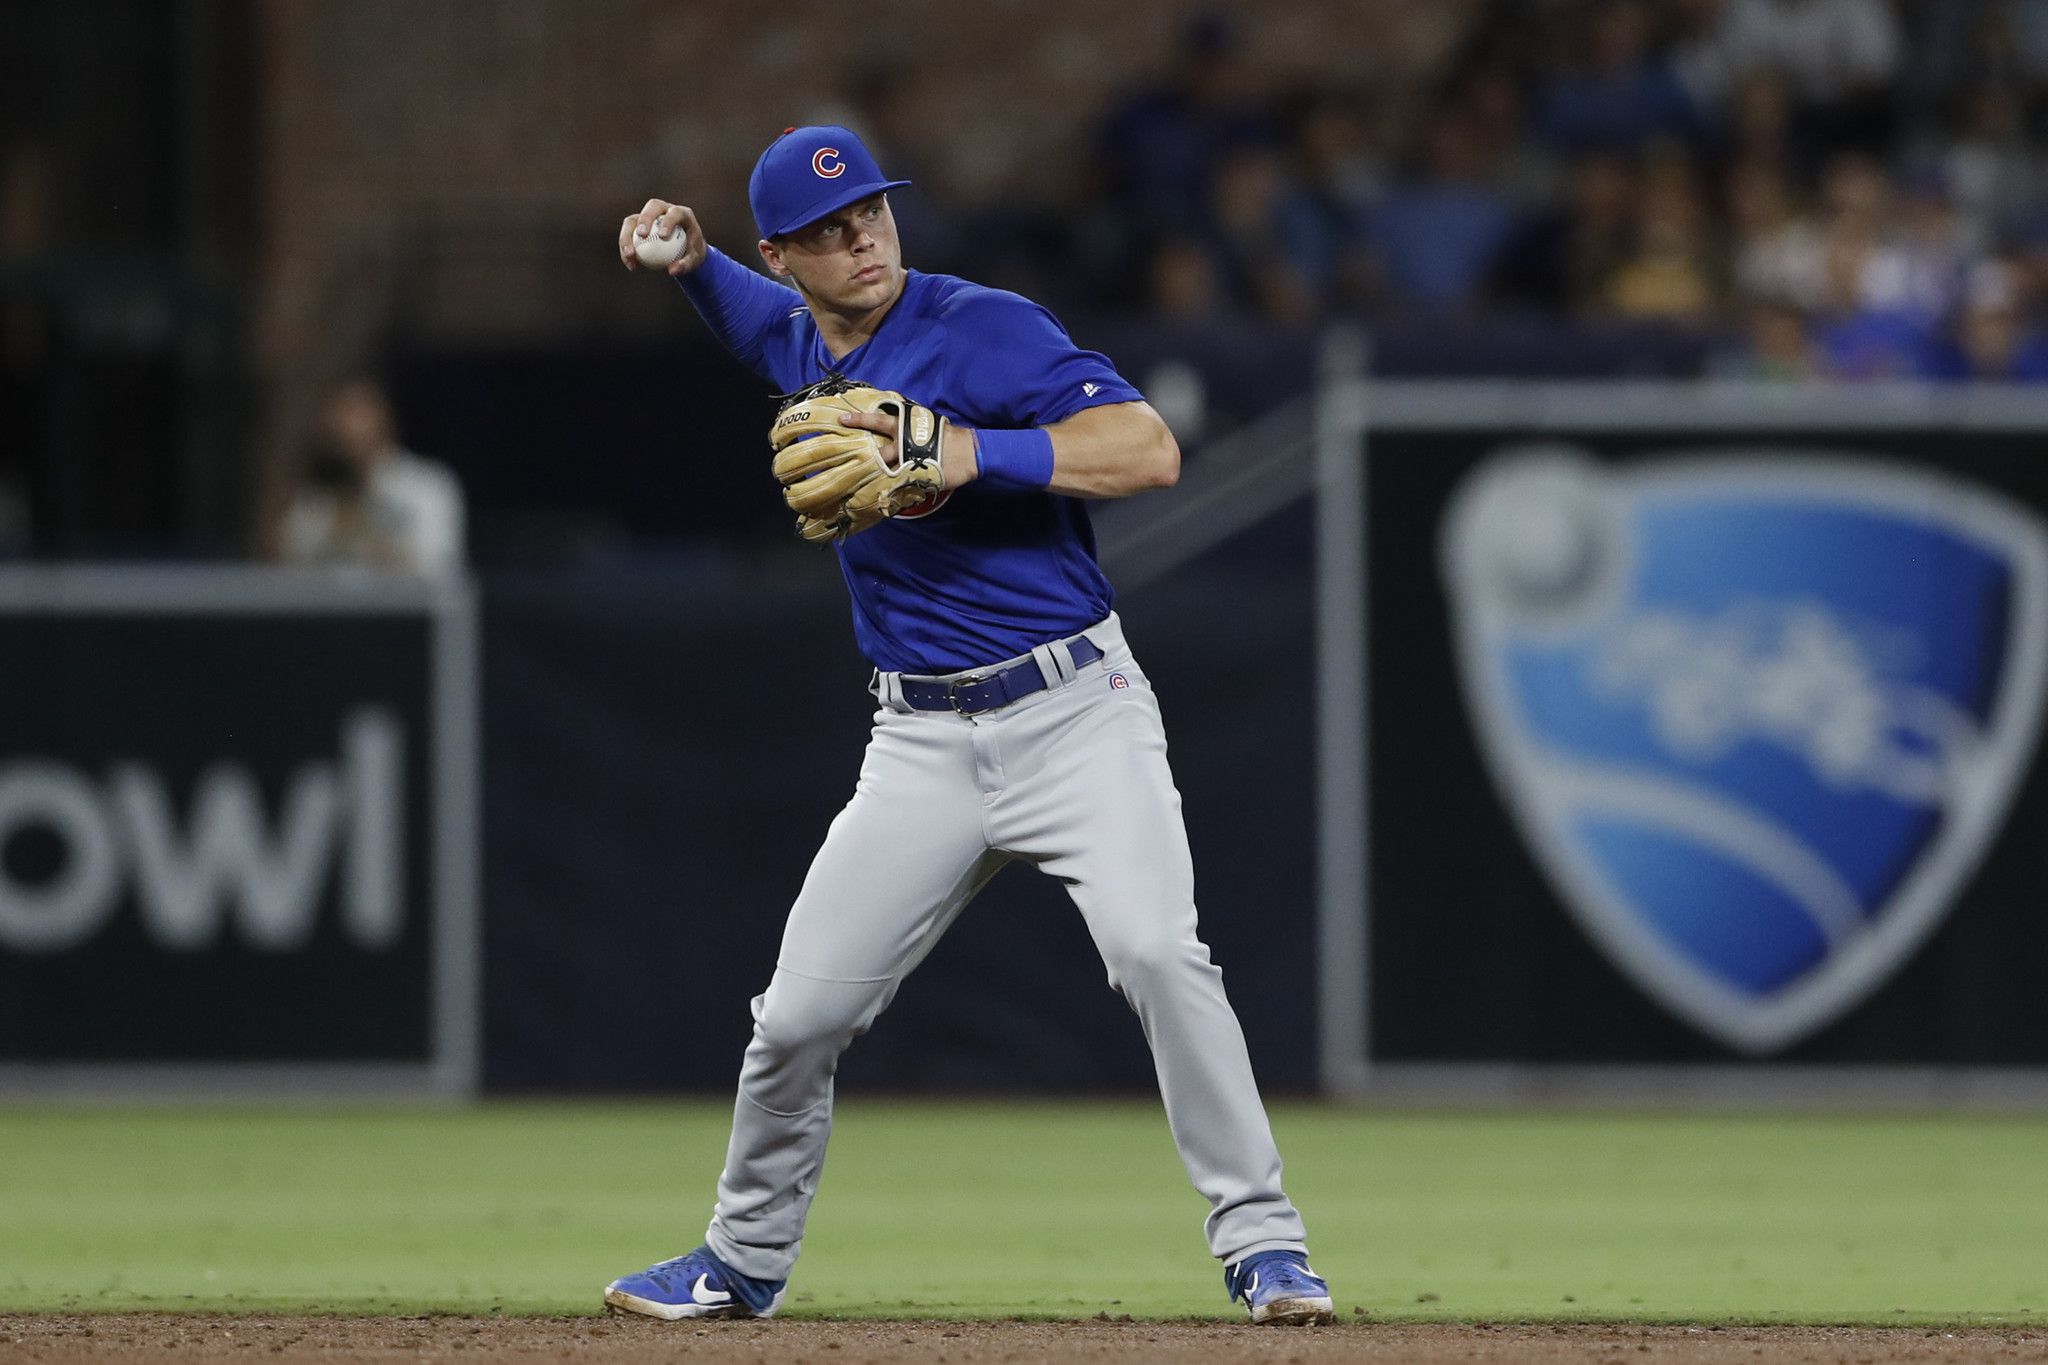 Nico Hoerner is transforming into the major league hitter the Cubs